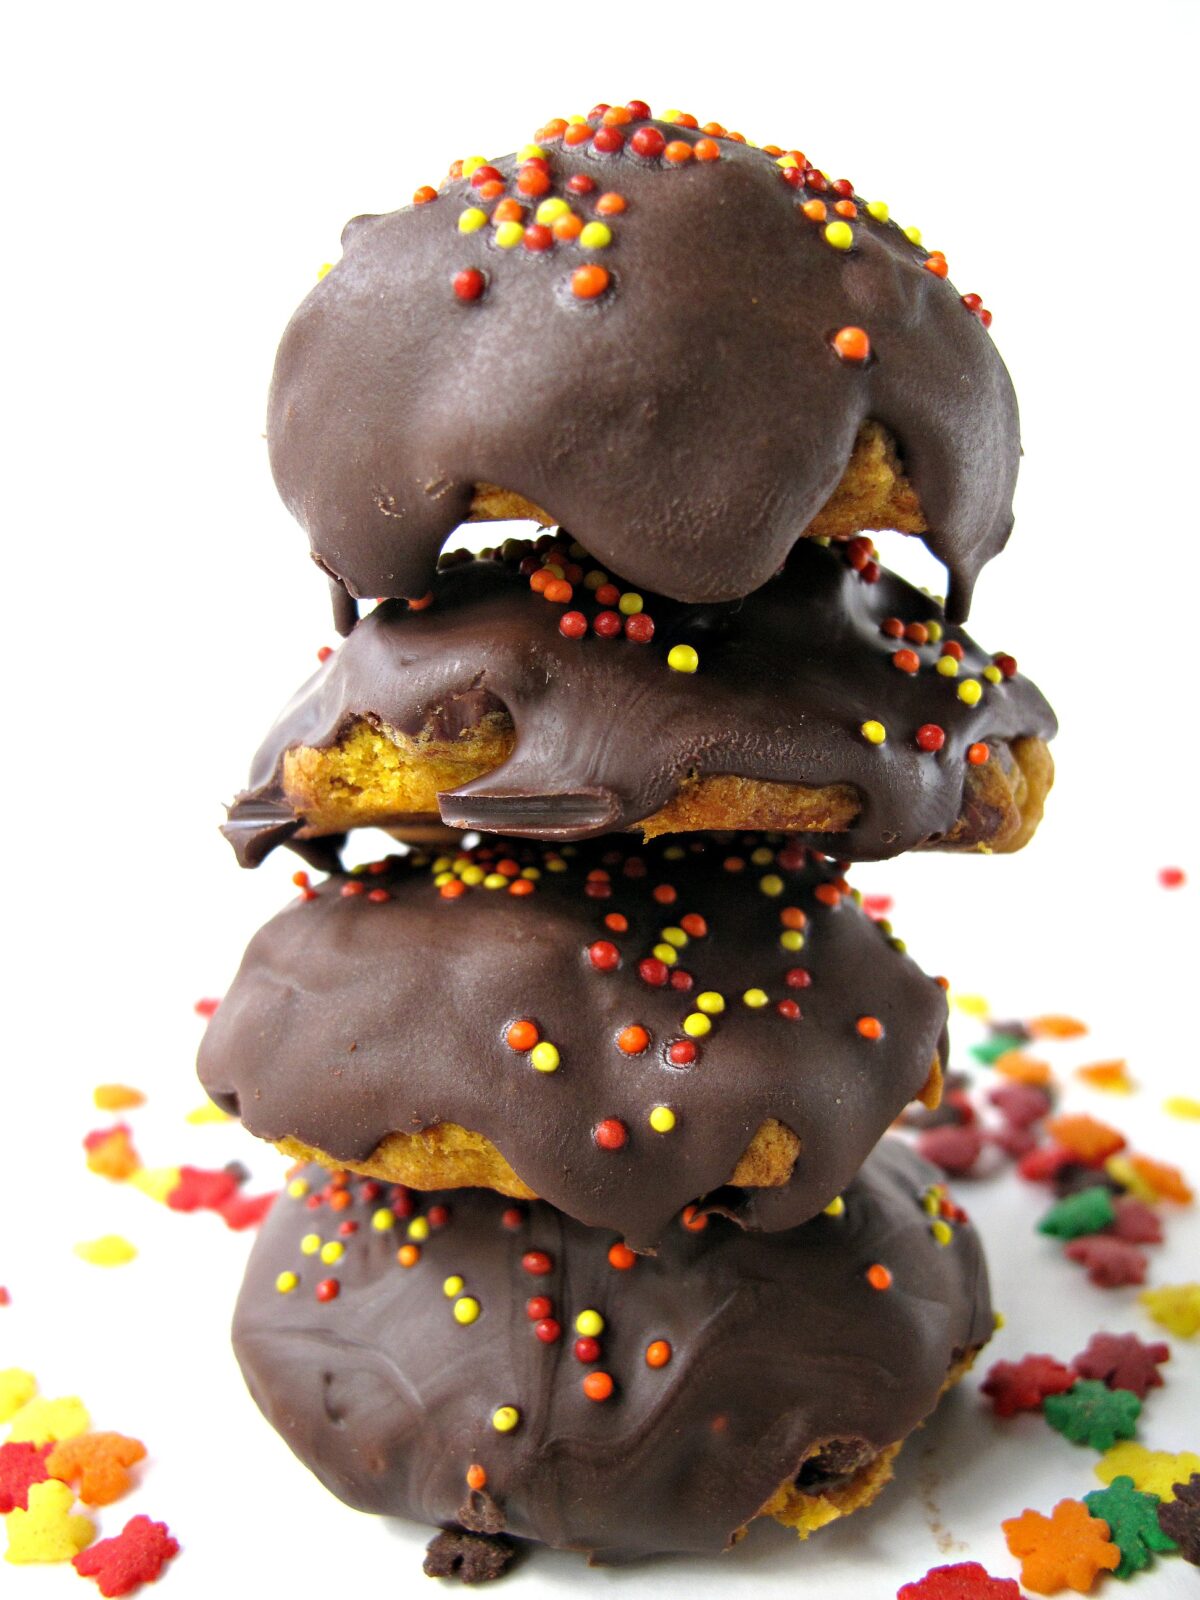 Stack of thick, round chocolate coated cookies.